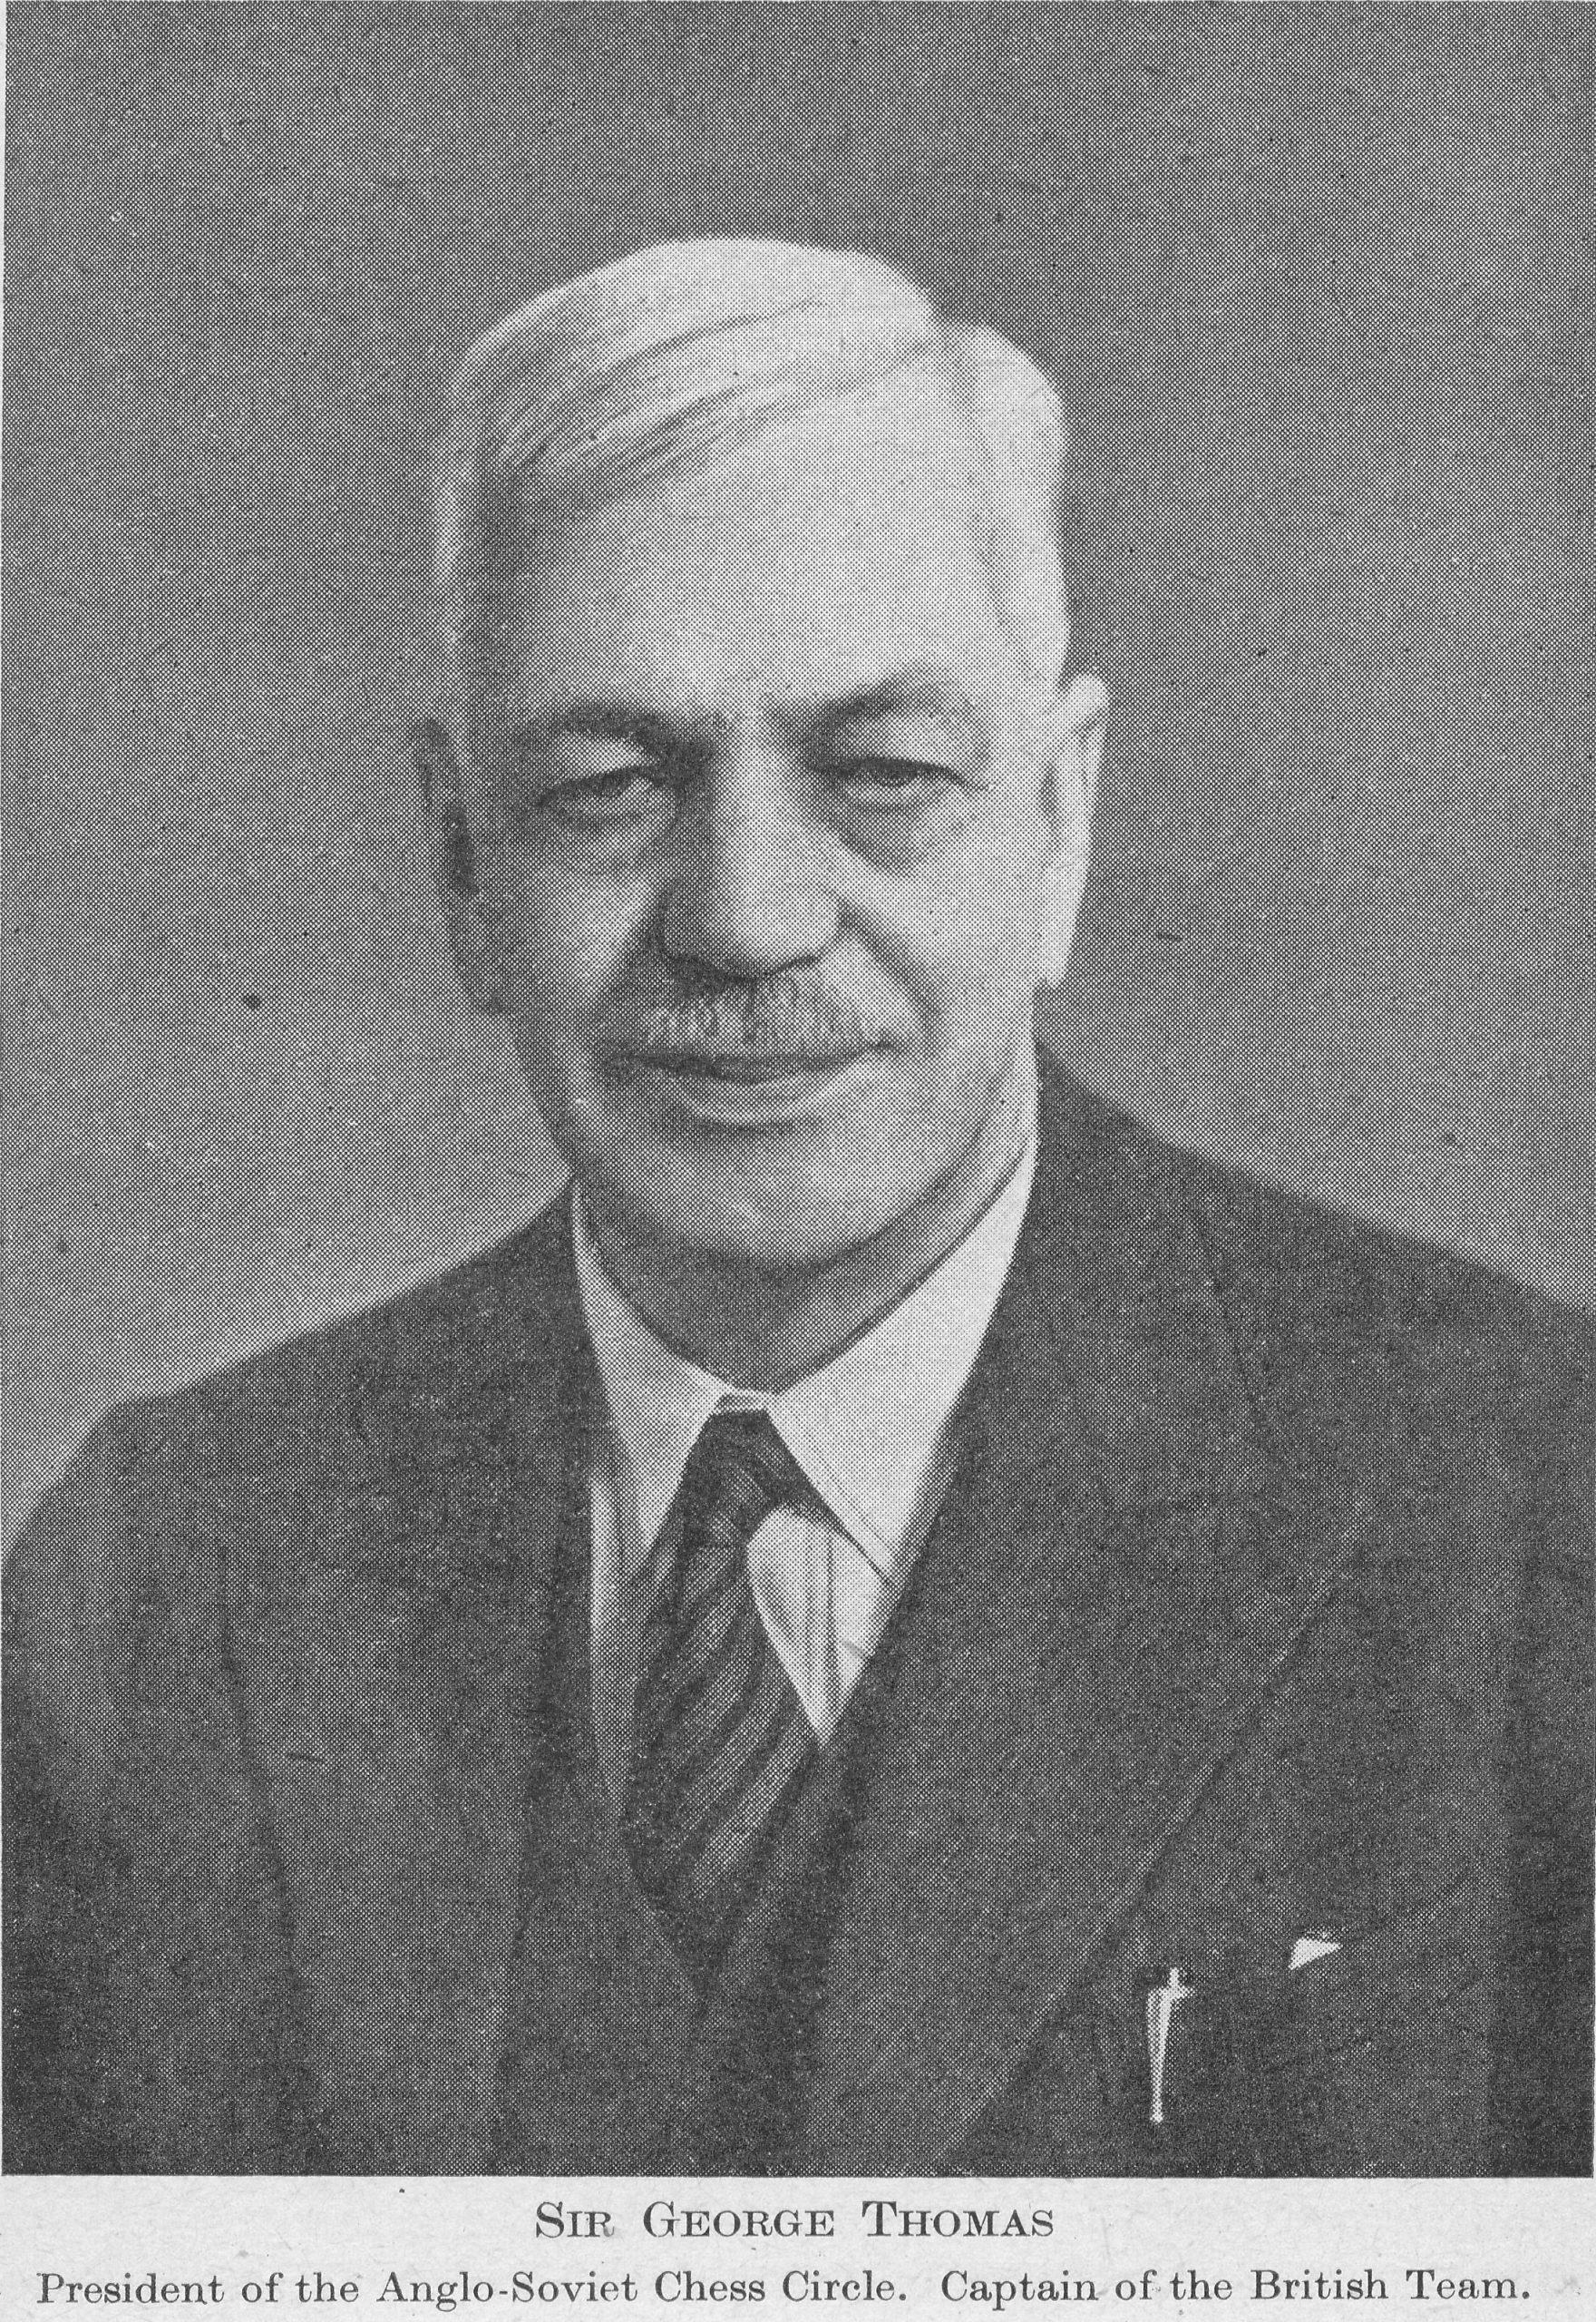 Sir George Thomas, President of the Anglo-Soviet Chess Circle. Captain of the British Team